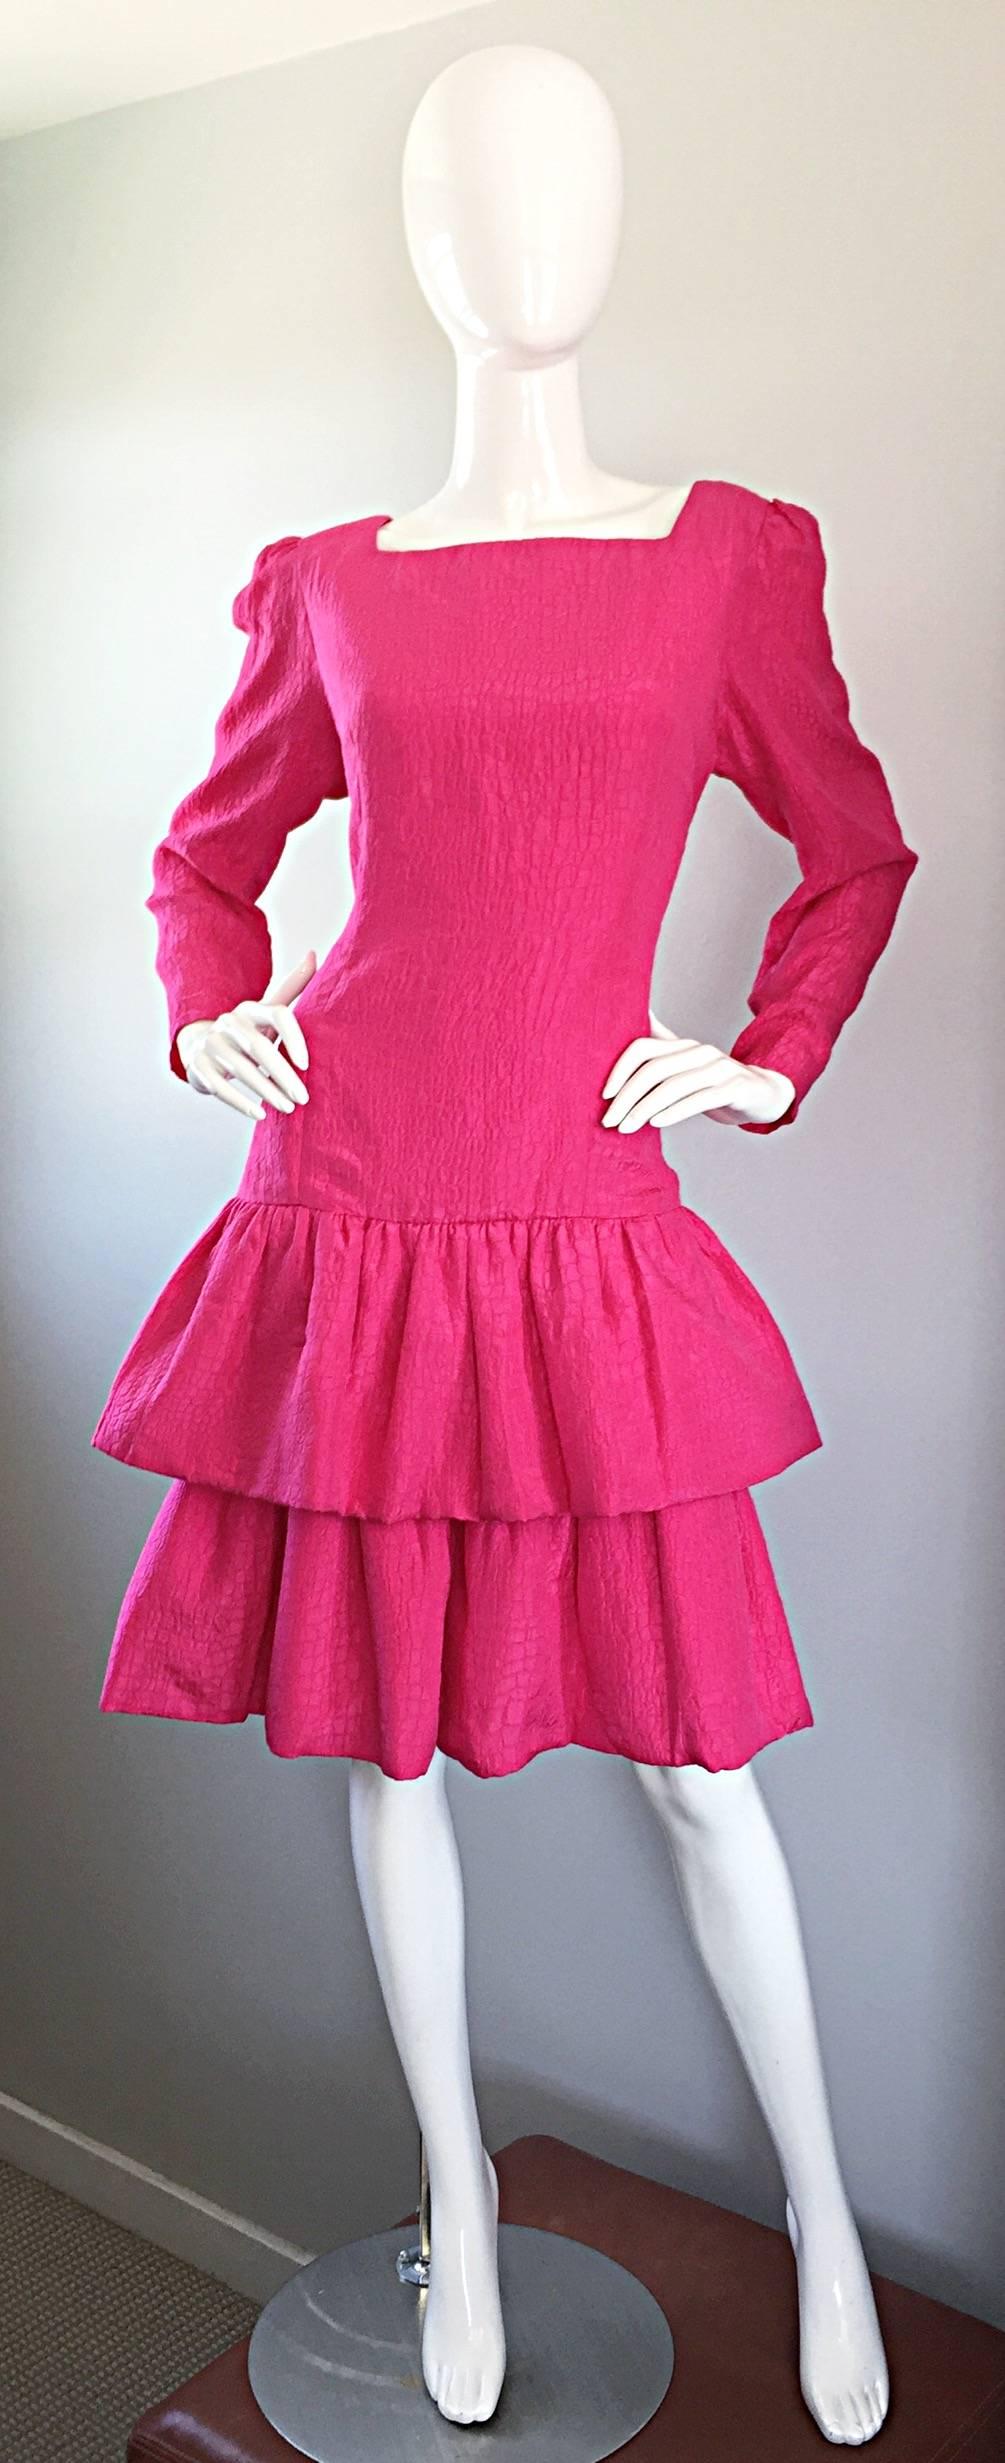 Stunning Vintage 1980s / 80s ADELE SIMPSON for NEIMAN MARCUS shocking hot pink silk alligator print dress! Flattering dropped waist with two tiers on the skirt. Hidden zipper up the back with hook-and-eye closure. Hidden interior weights on eigh